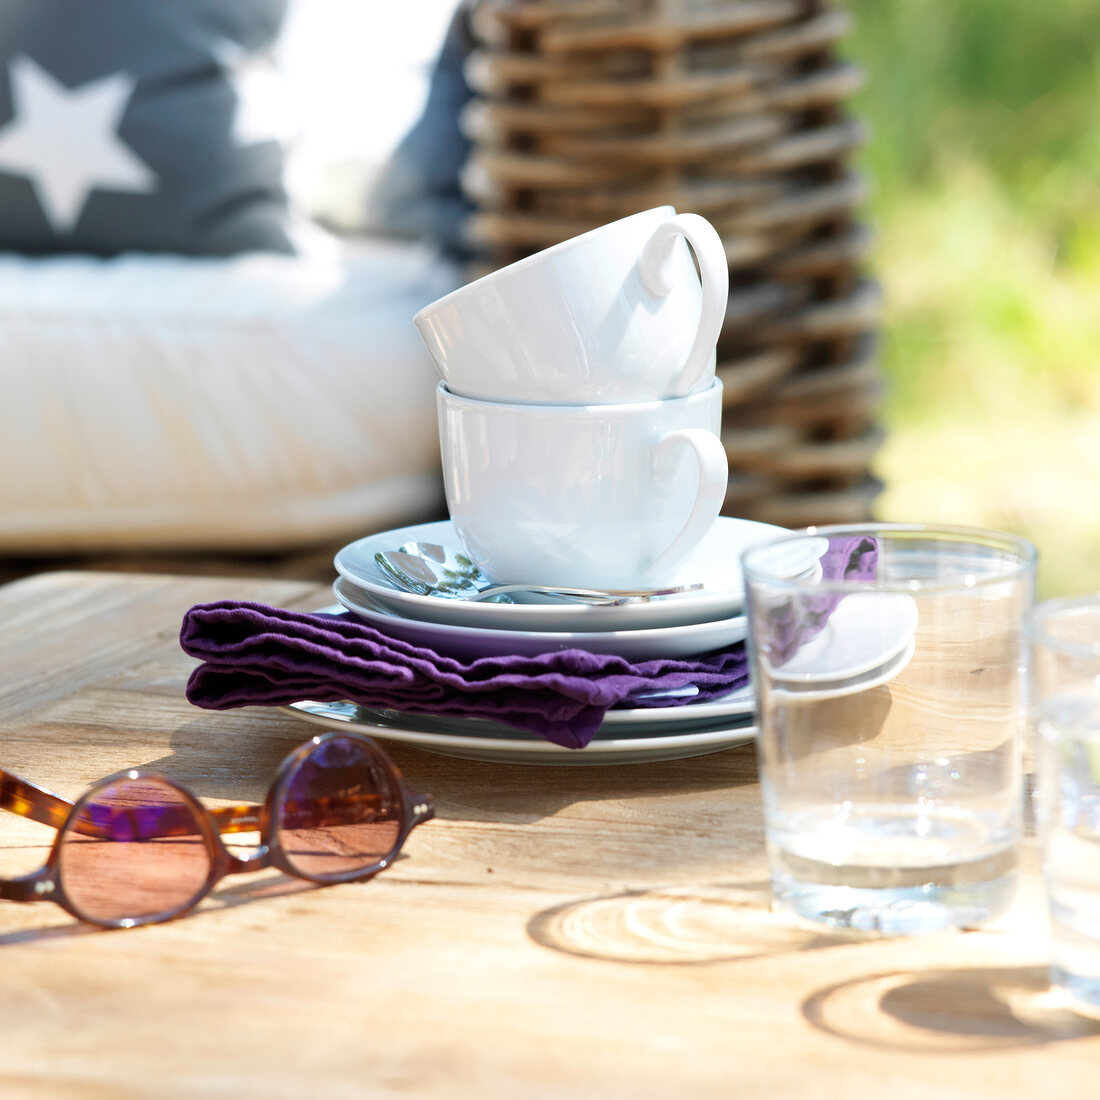 Dishes, glass, purple napkin and sunglasses on wooden surface